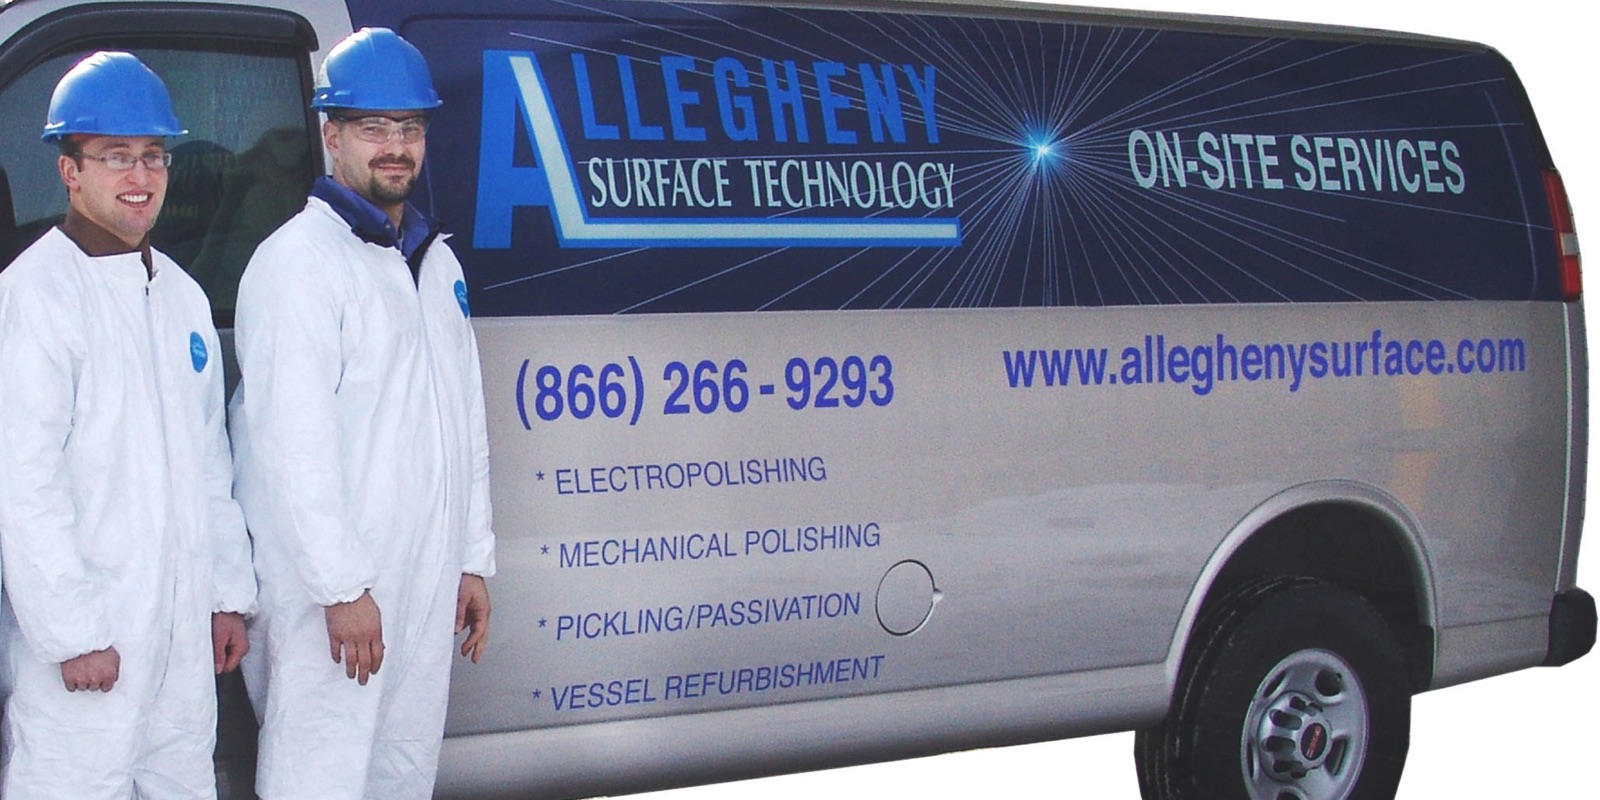 Allegheny Surface Technology technicians standing in front of a AST on-site services van.